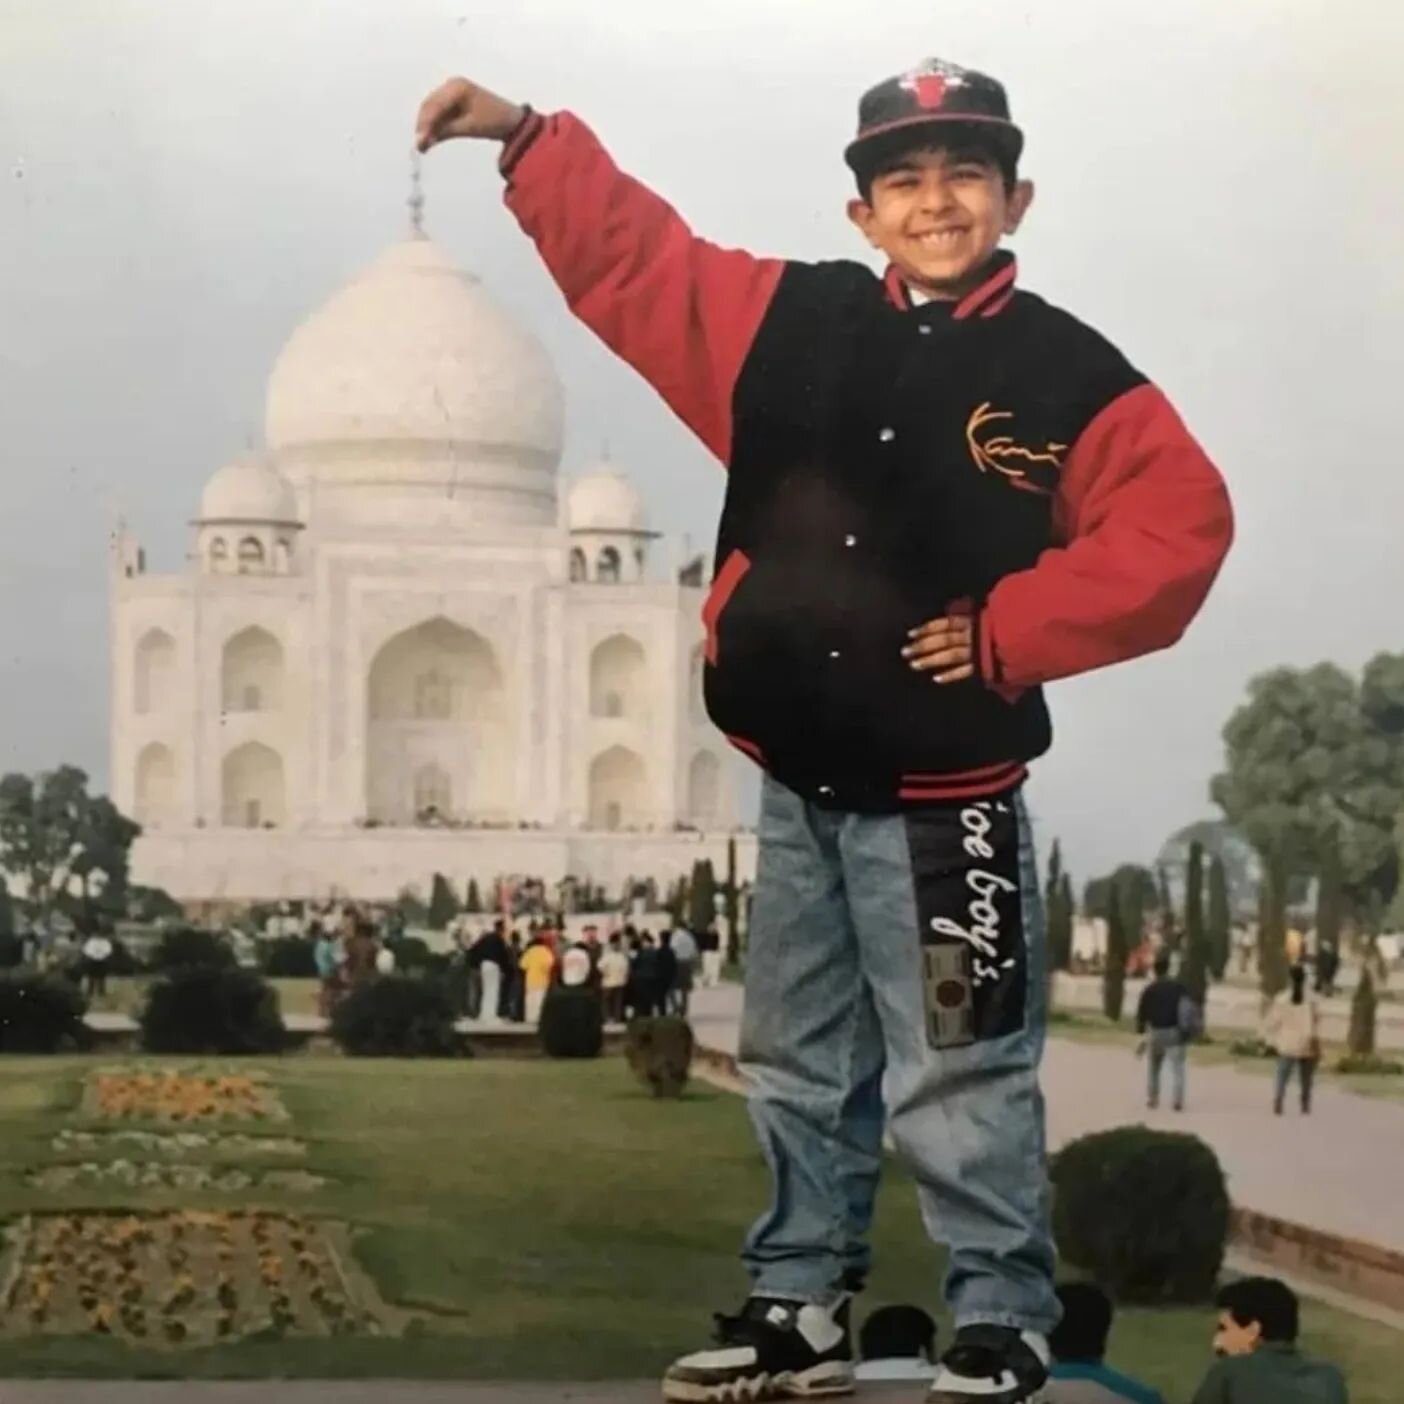 Incase u aint noticed I'm Indian 👳🏿... So here's a legit pic of me standing outside The Taj Mahal in all my 90s gear.

Take note.

And yes I did grow into those mammoth ears. 😂

Btw, this place had the sickest sound system.

#tajmahal #karlkani #9